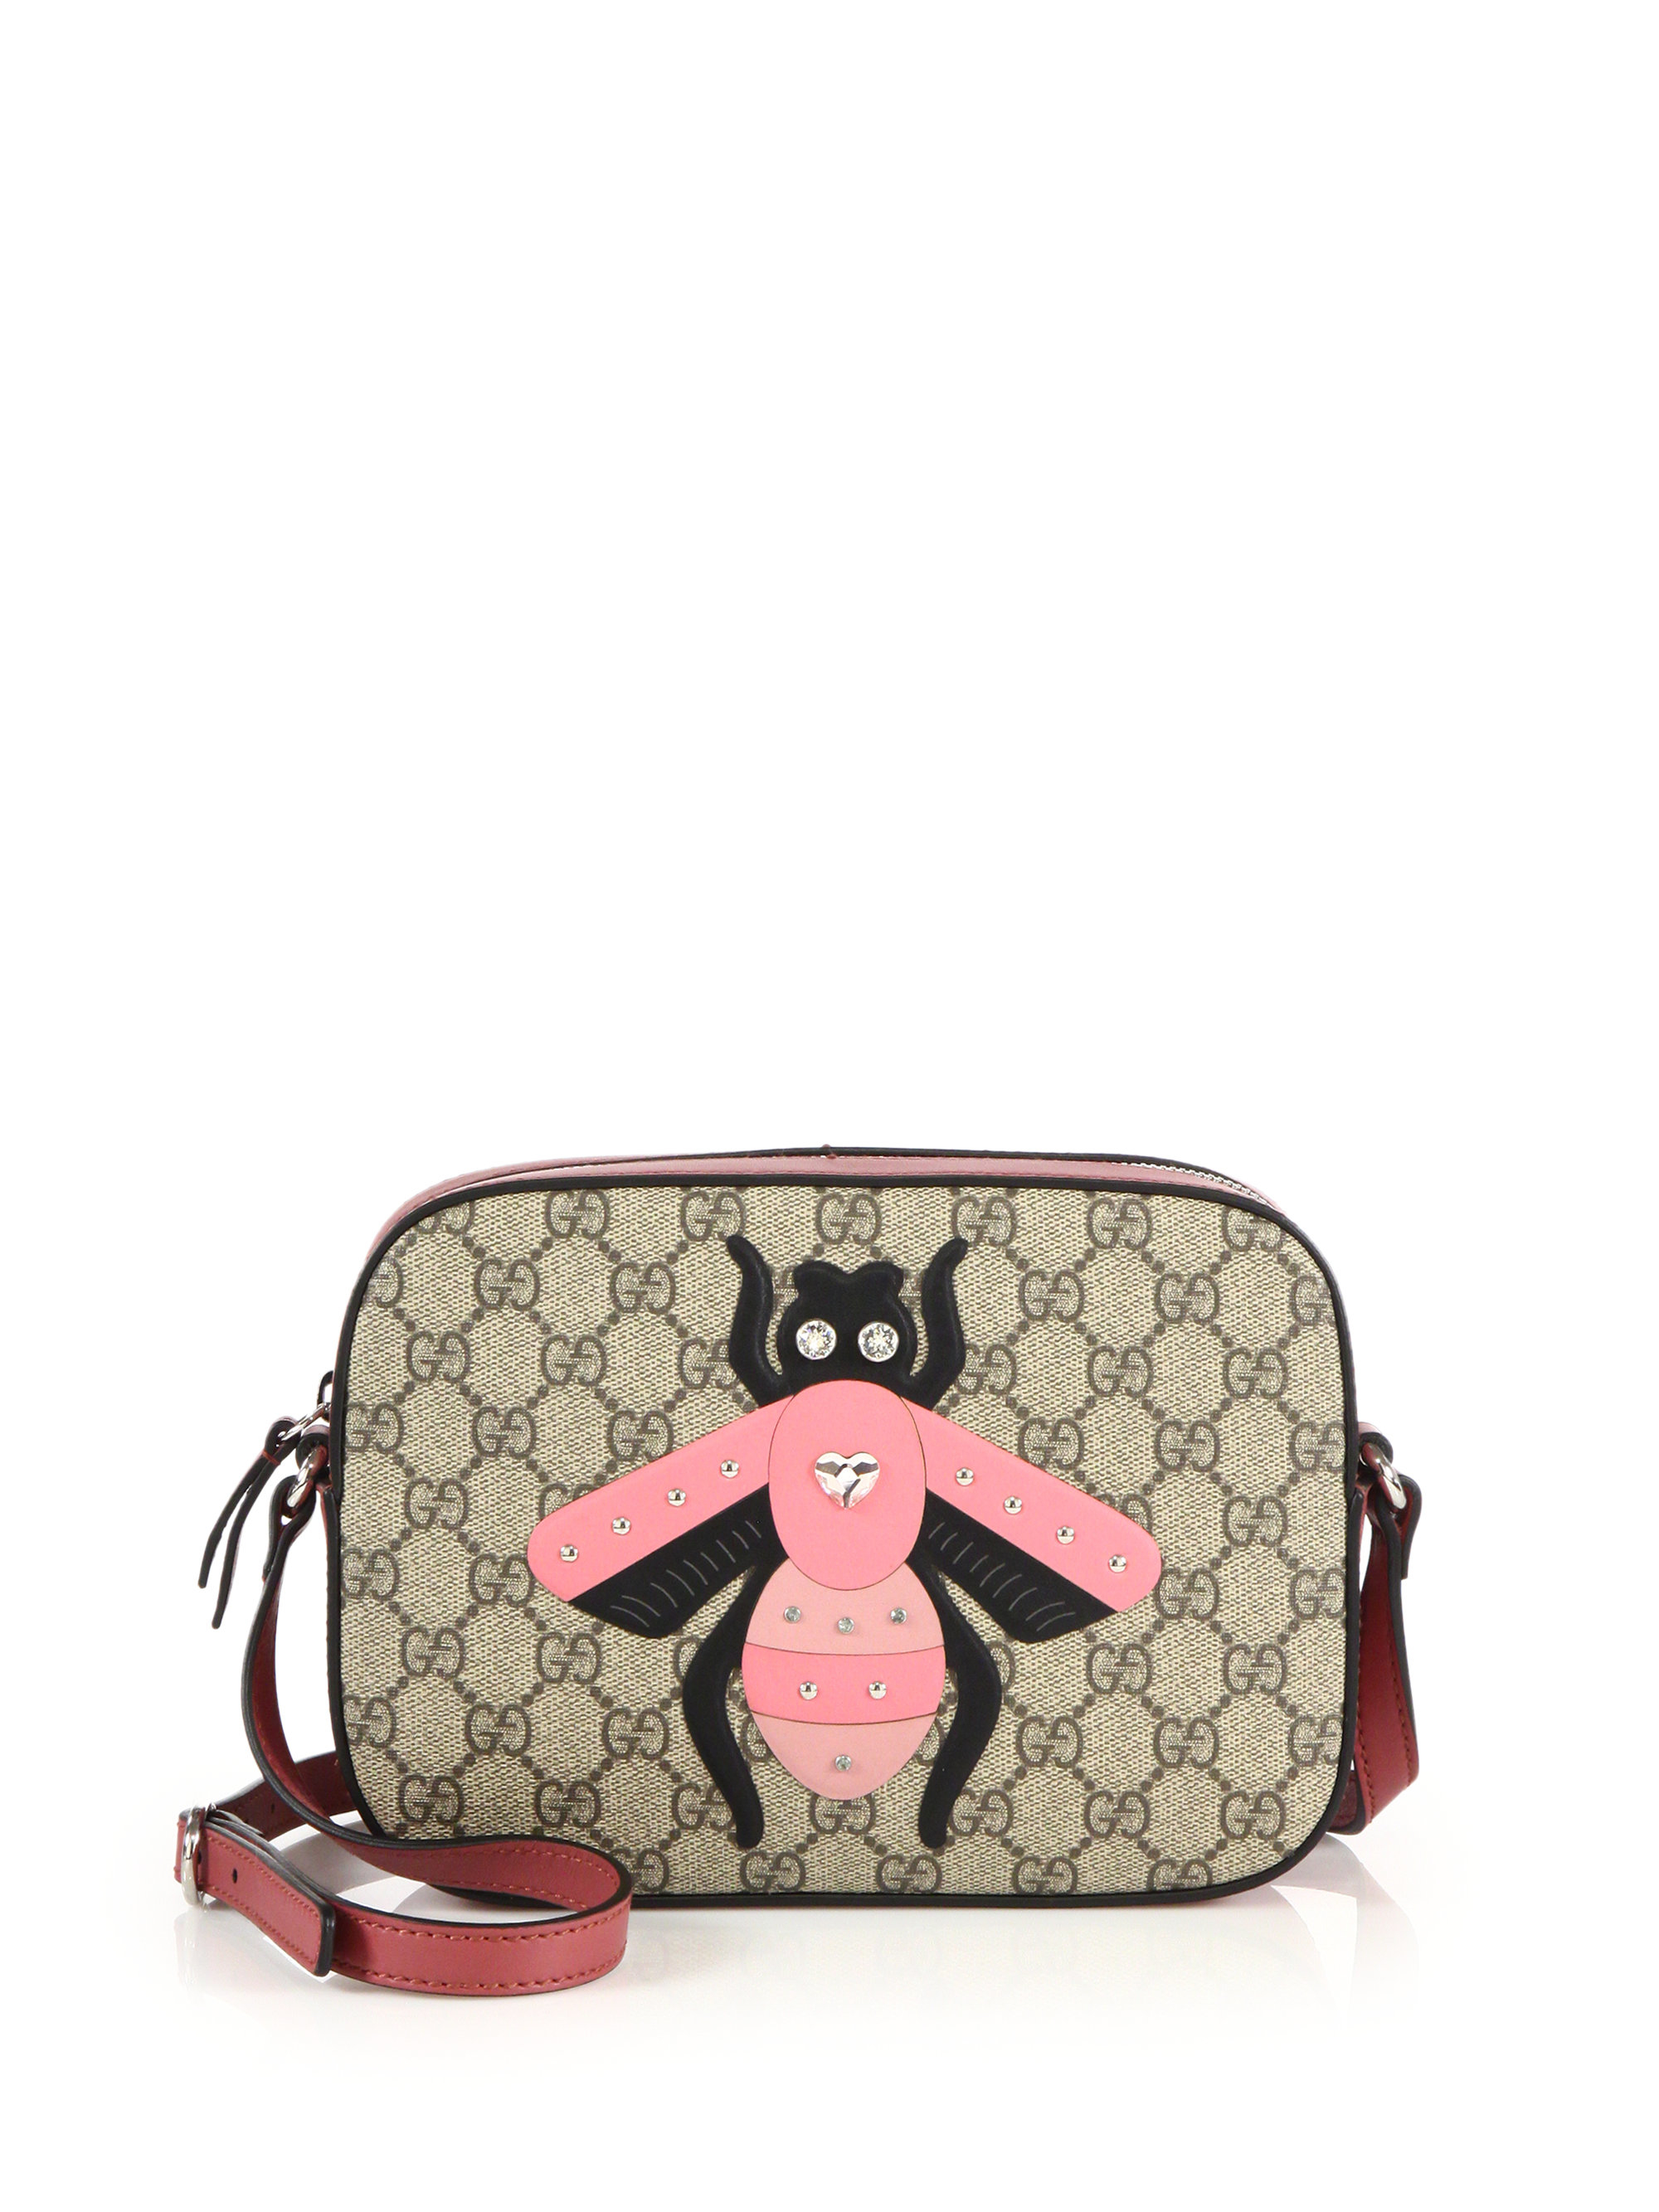 Gucci GG Supreme Bee Canvas And Leather Shoulder Bag in Rose-Beige (Natural) - Lyst